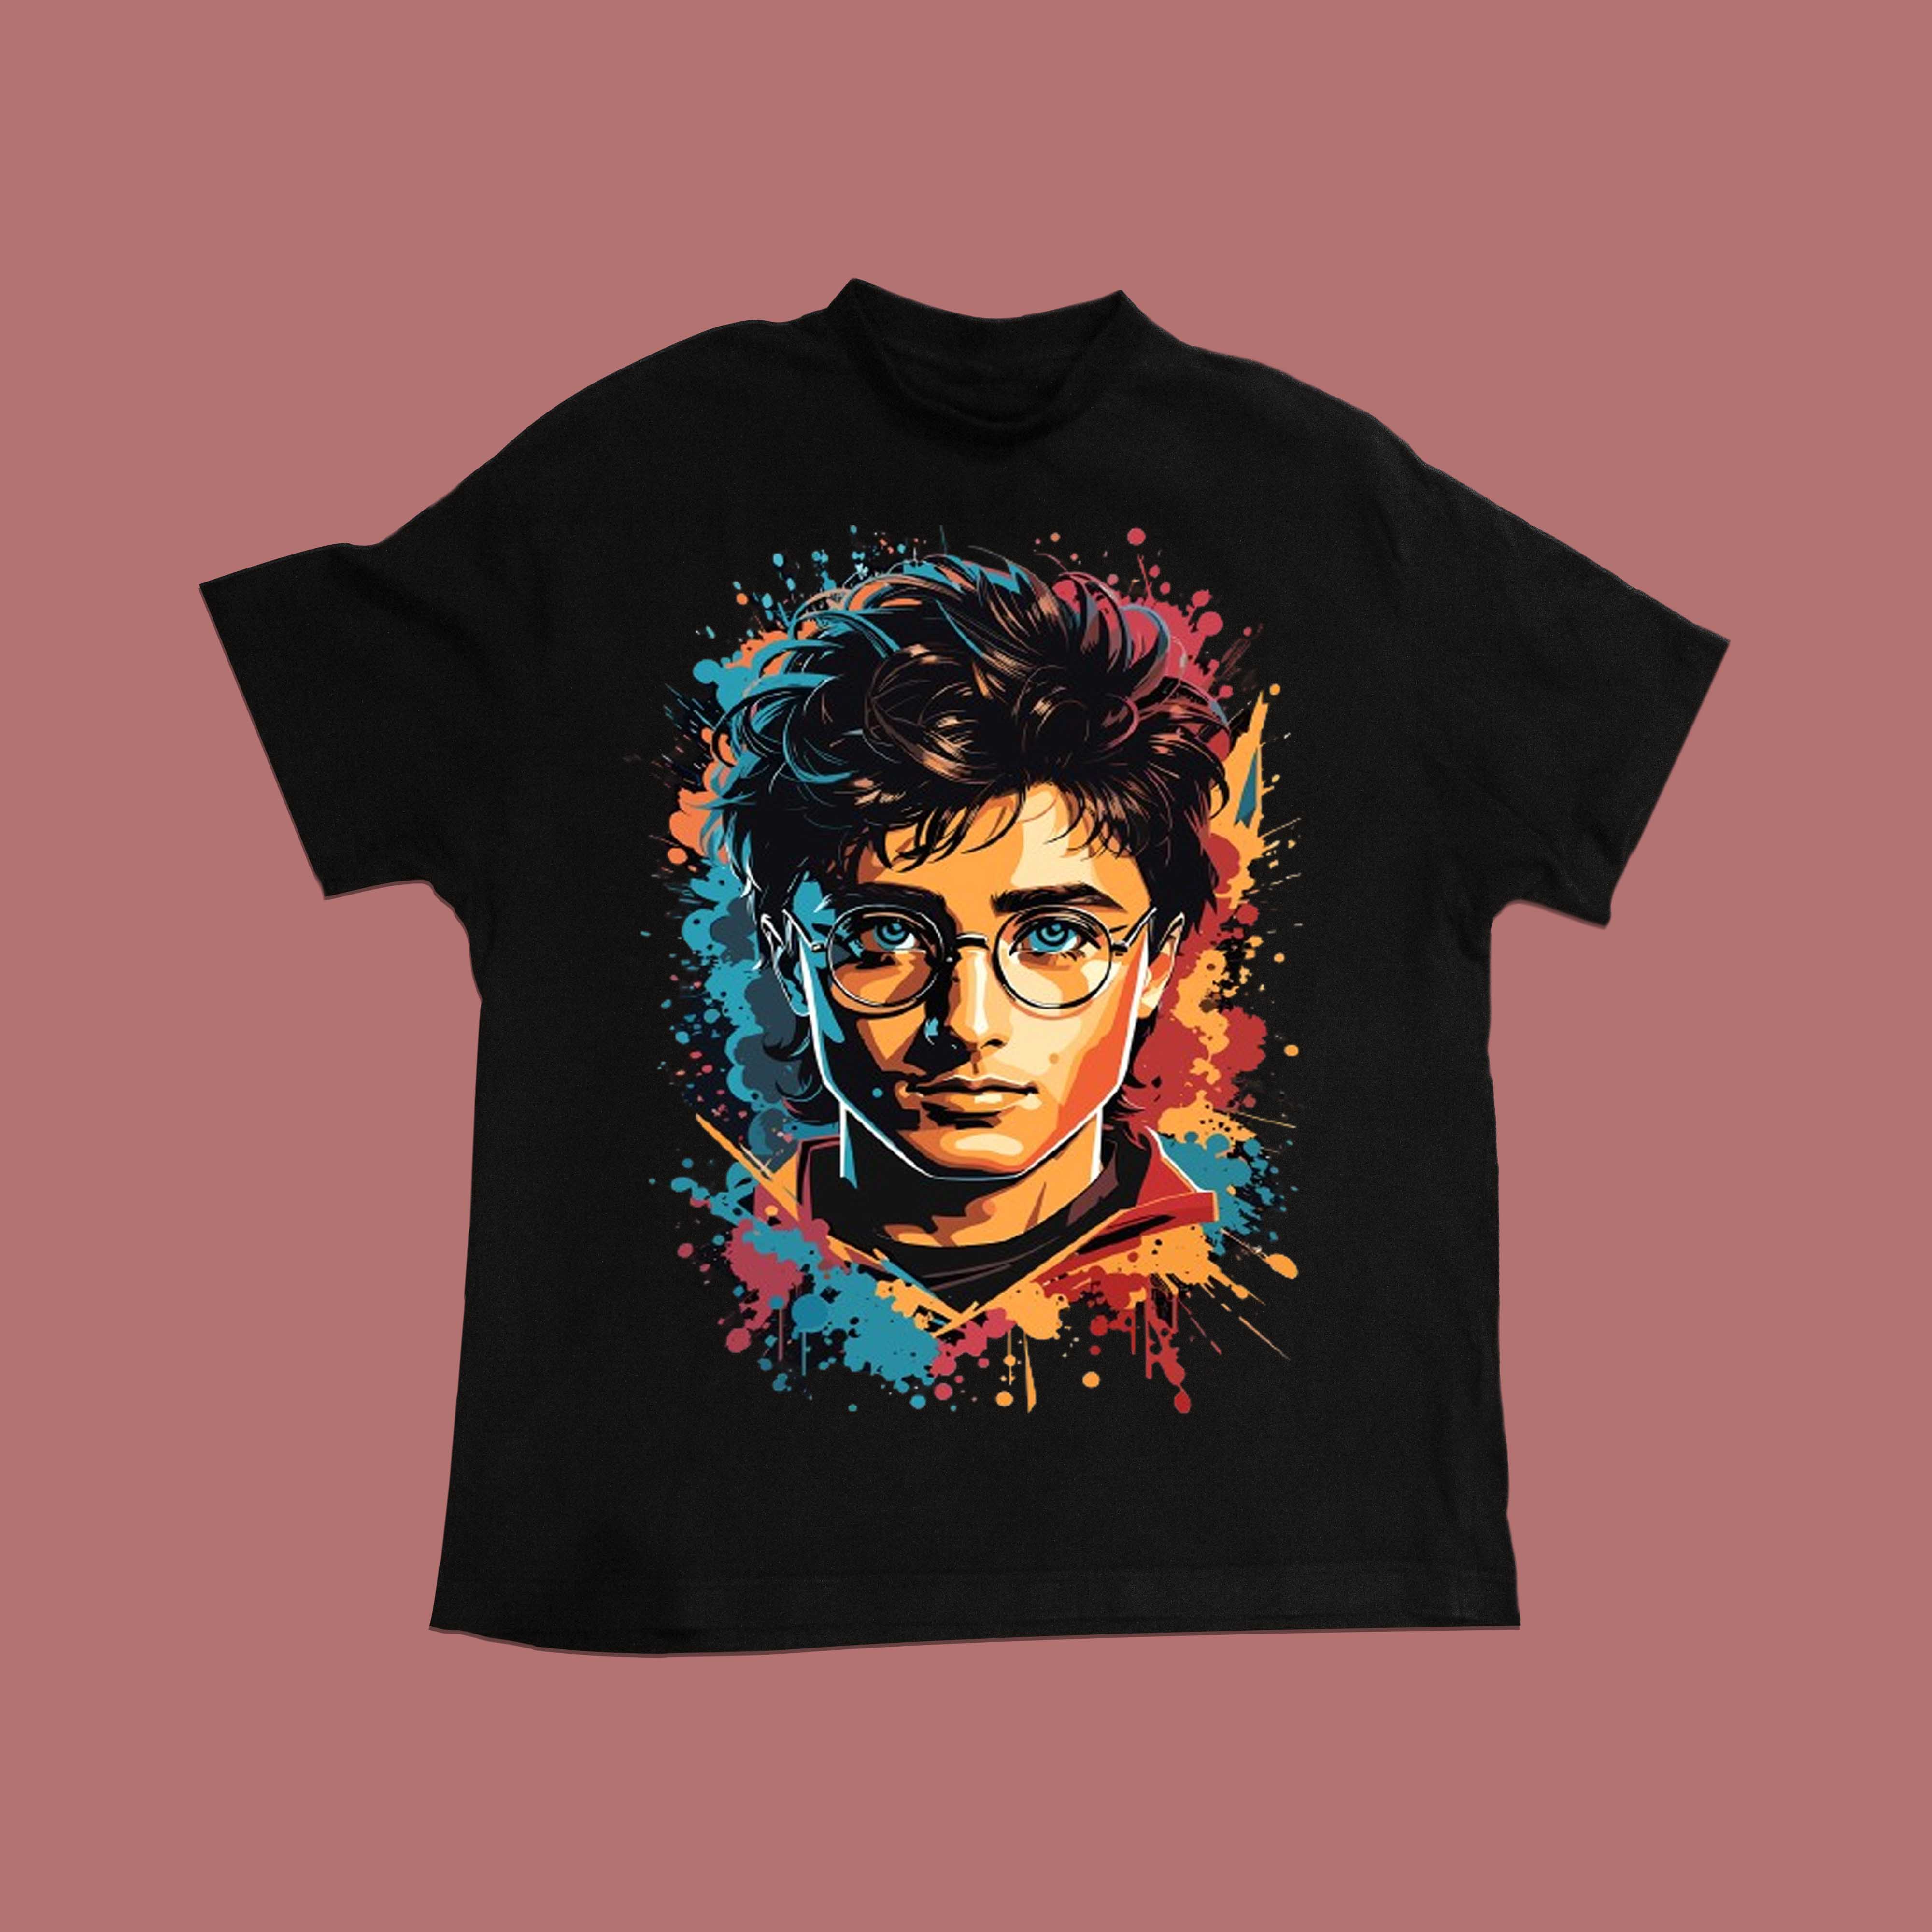 Harry Potter Graphic design t-shirt London street colorful tones highly detailed clean vector image flat design preview image.